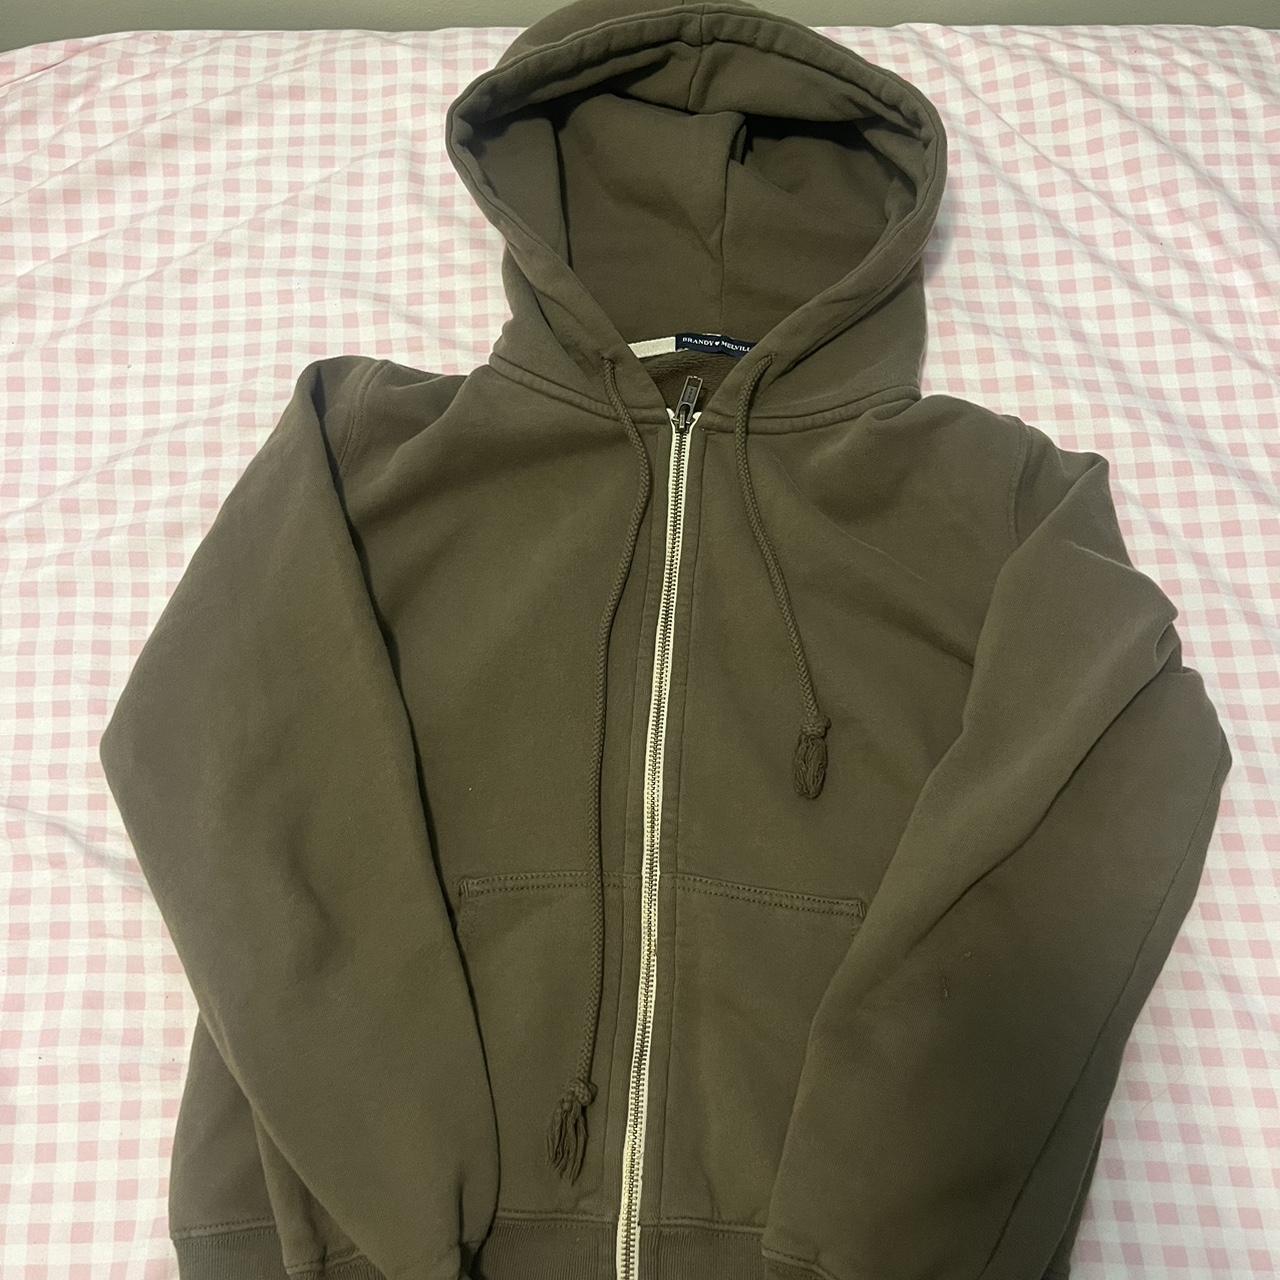 Brandy Melville olive green and cream christy hoodie